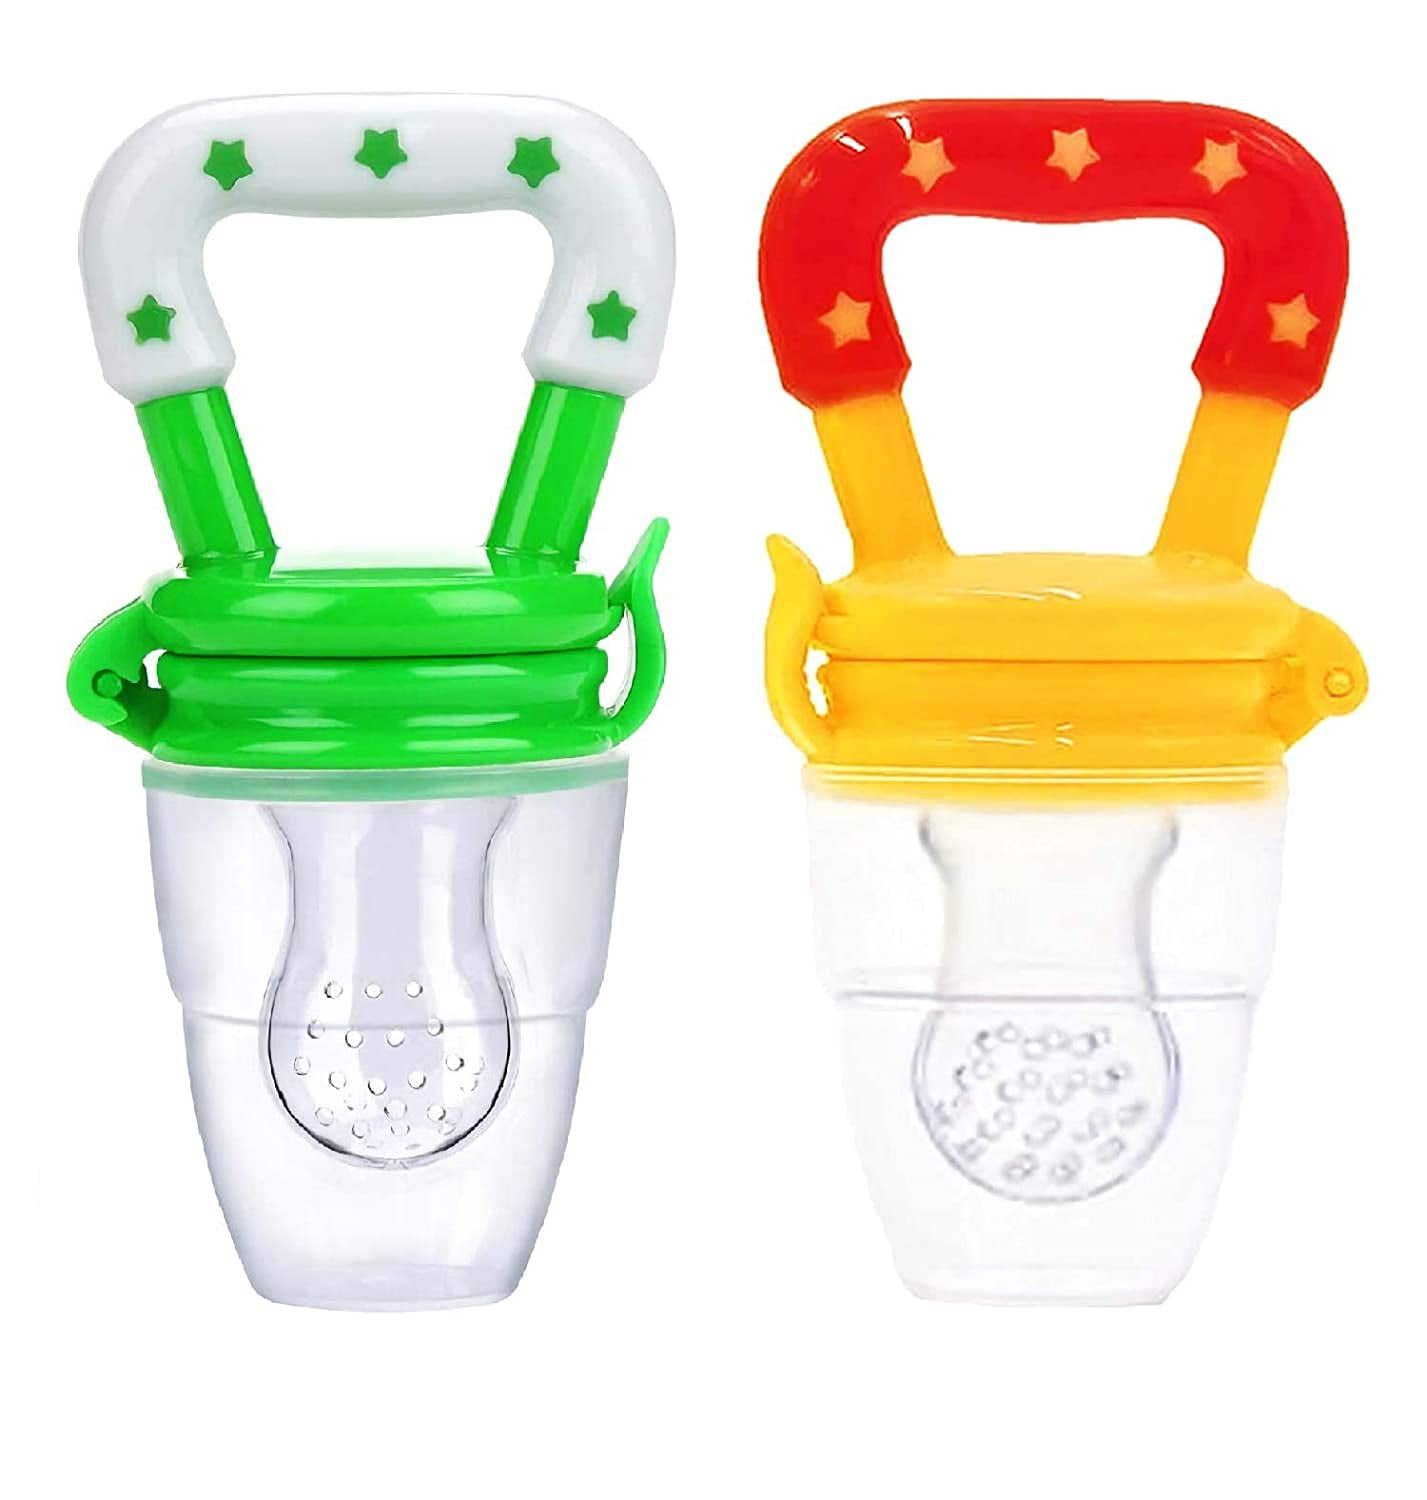 Bc Babycare Baby Food Feeder Pacifiers, Two Size Baby Fruit Pacifier Feeder  for Different Month Age Baby,Silicone Food Grade Infant Teether Training